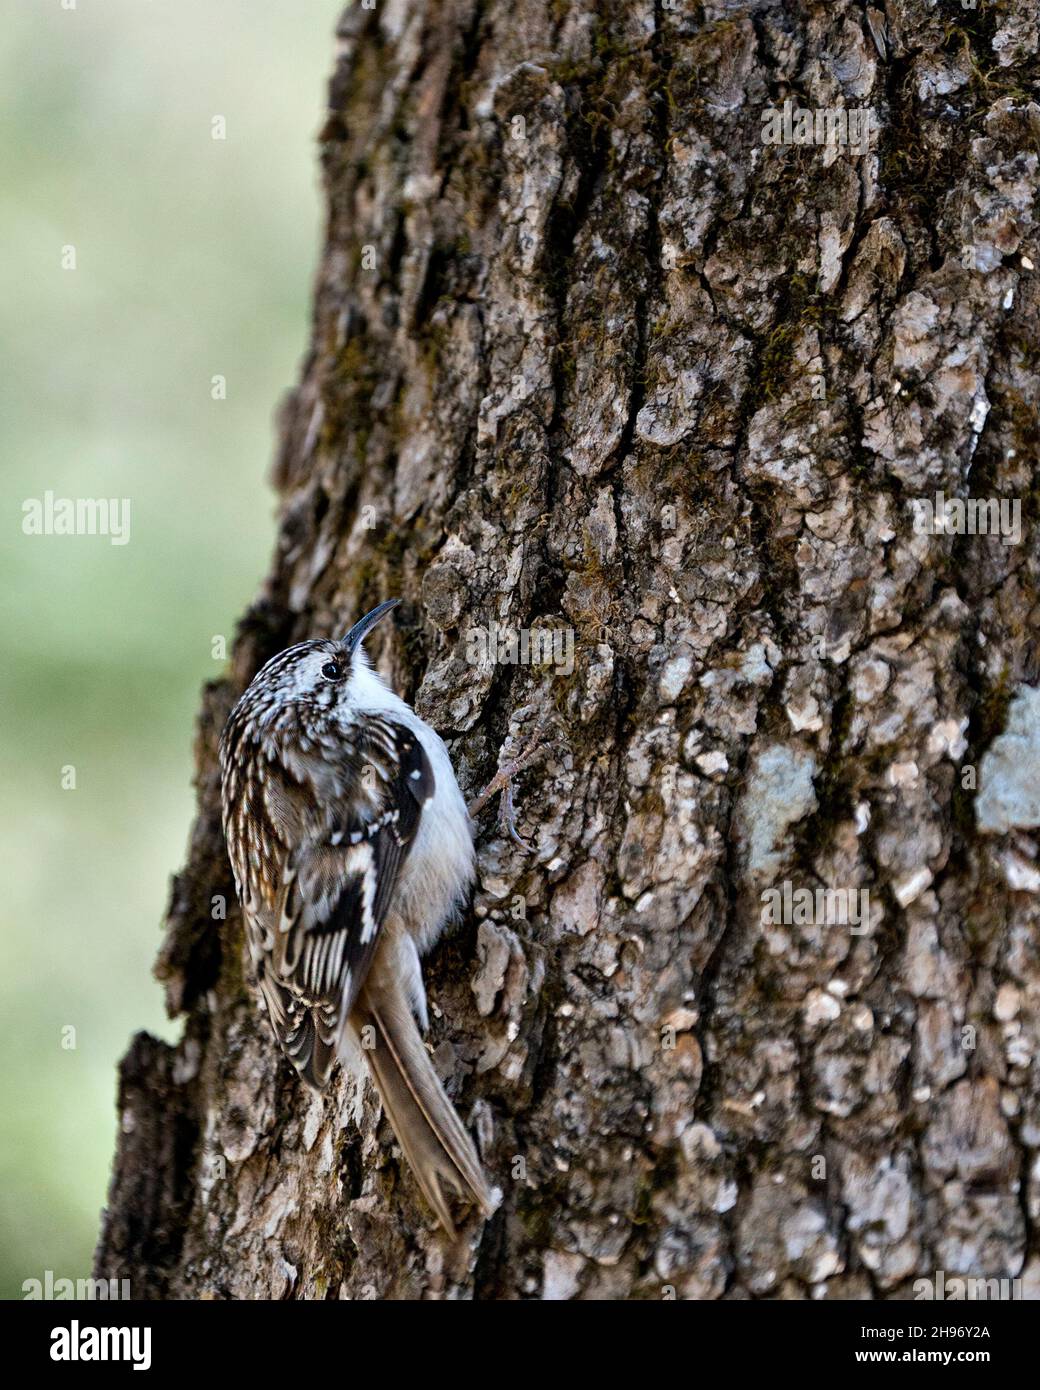 Brown Creeper bird close-up on a tree trunk looking for insect in its environment and habitat and displaying camouflage brown feathers. Stock Photo